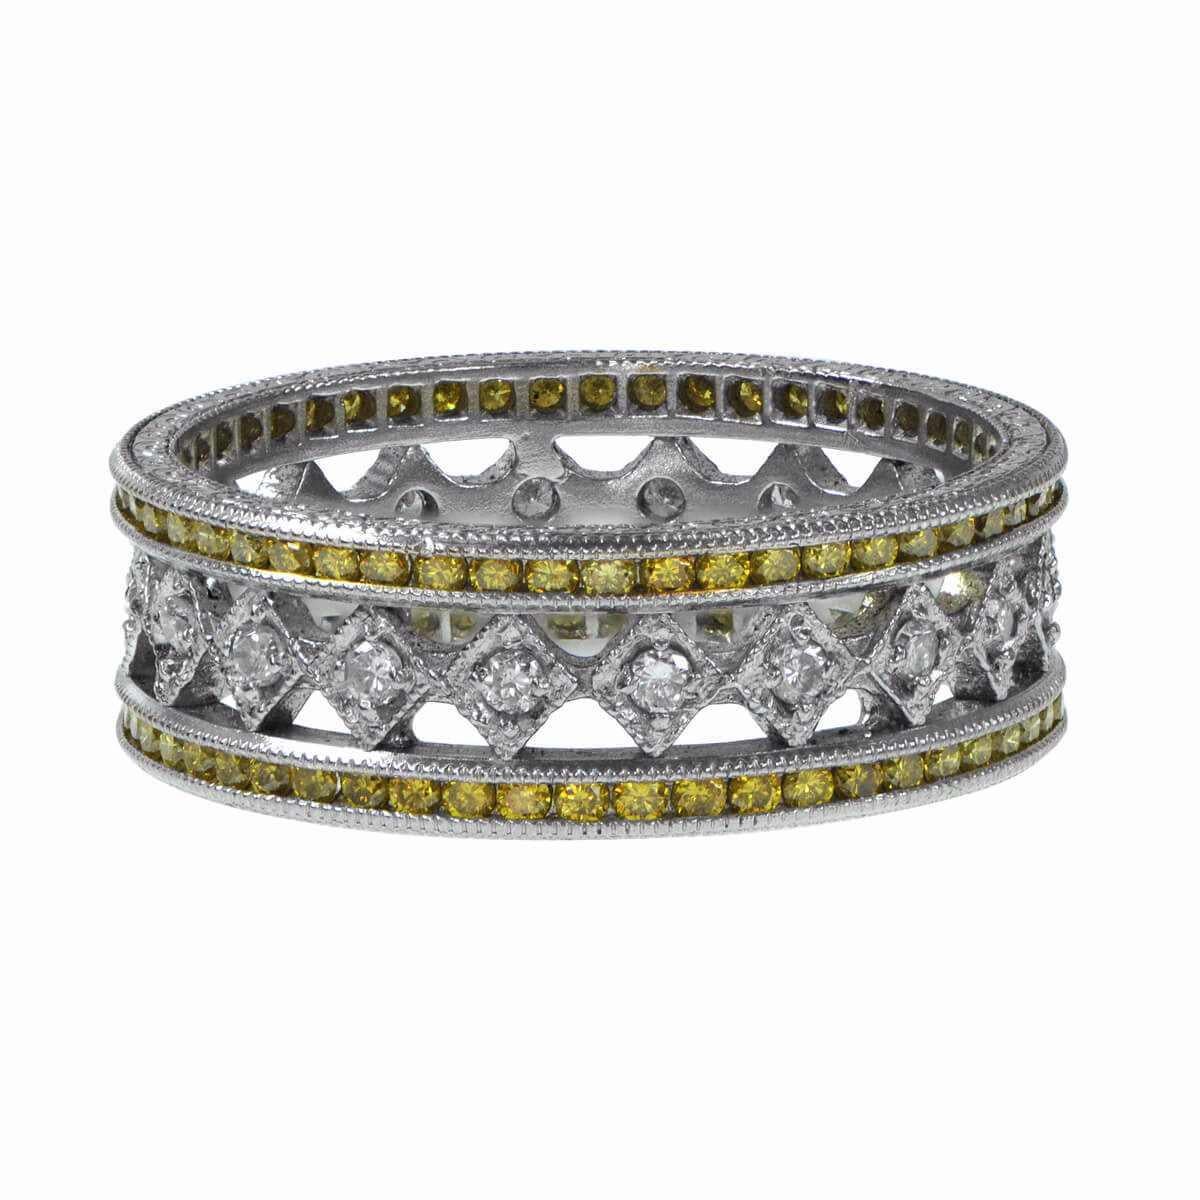 This exquisite platinum wedding band features a central row of approximately 0.30 carats combined with white diamonds with H color and VS1 clarity. On each side, channel-set yellow diamonds enhance the design, contributing to a total yellow diamond